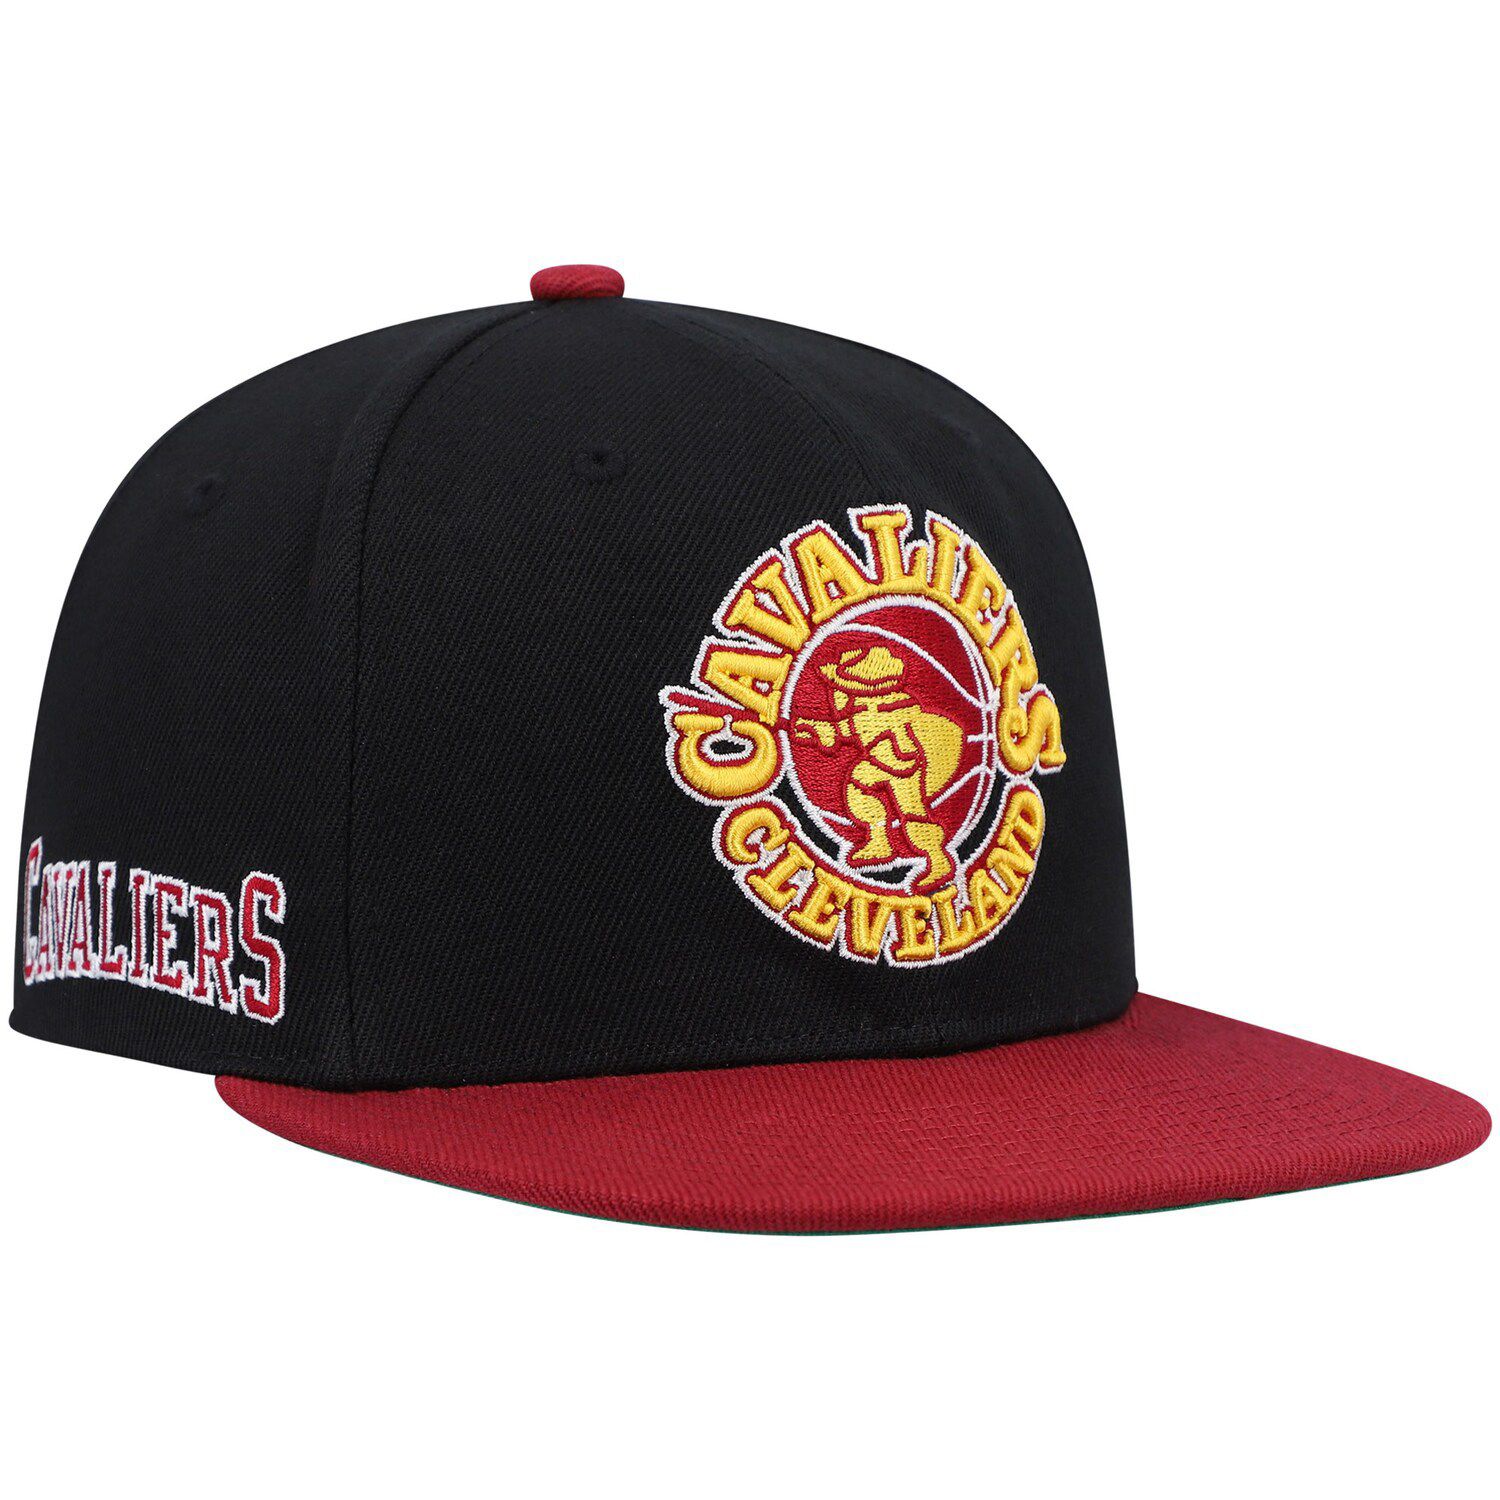 Men's Mitchell & Ness Wine Cleveland Cavaliers Core Side Snapback Hat